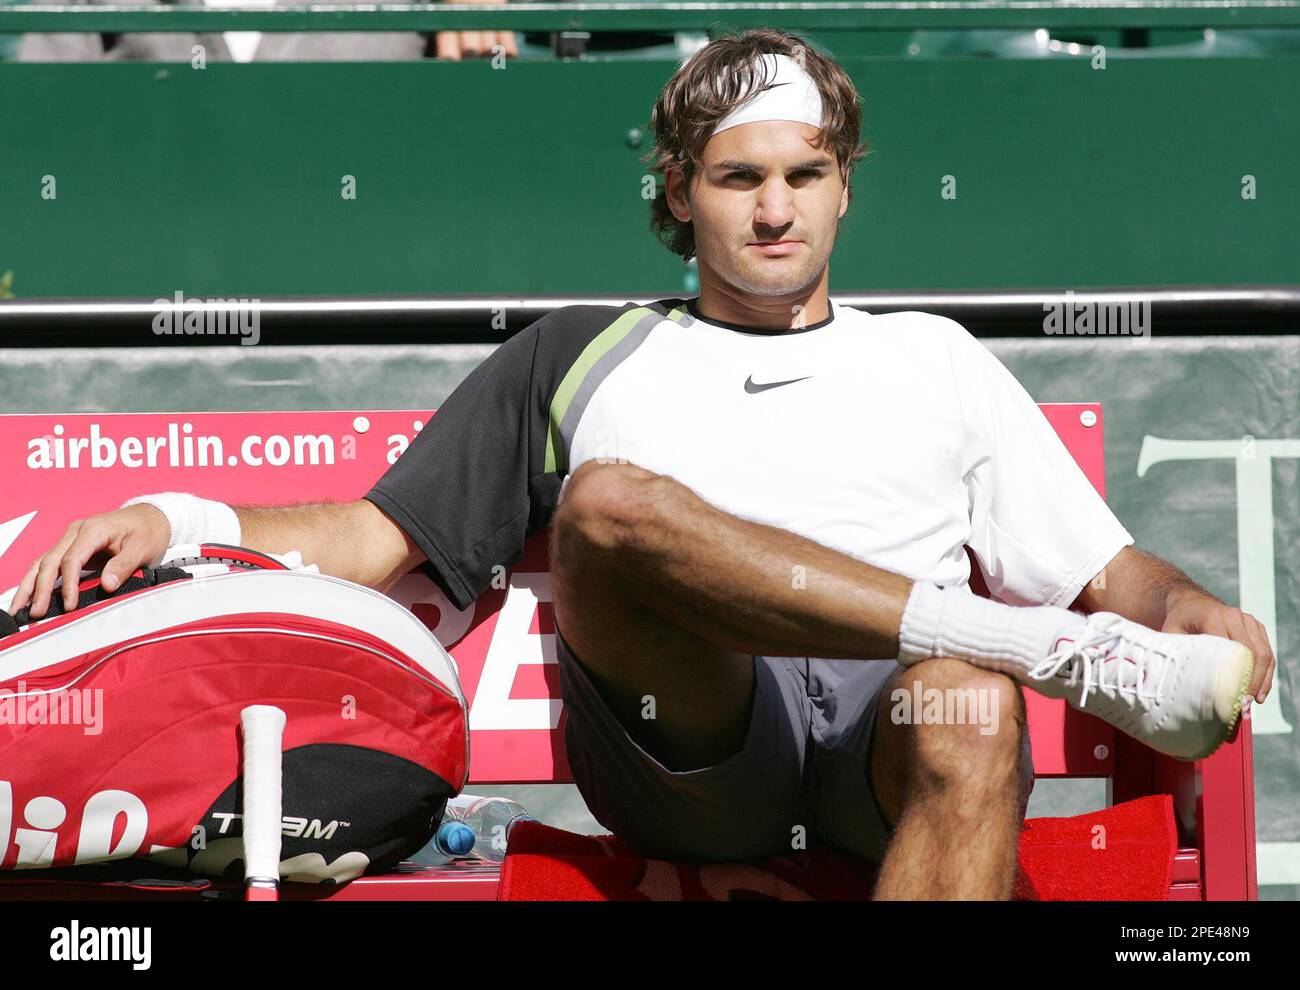 Swiss player Roger Federer sits on his bench, and refuses to go back on the  court during the third set at his first round tennis match against Robin  Soderling from Sweden at